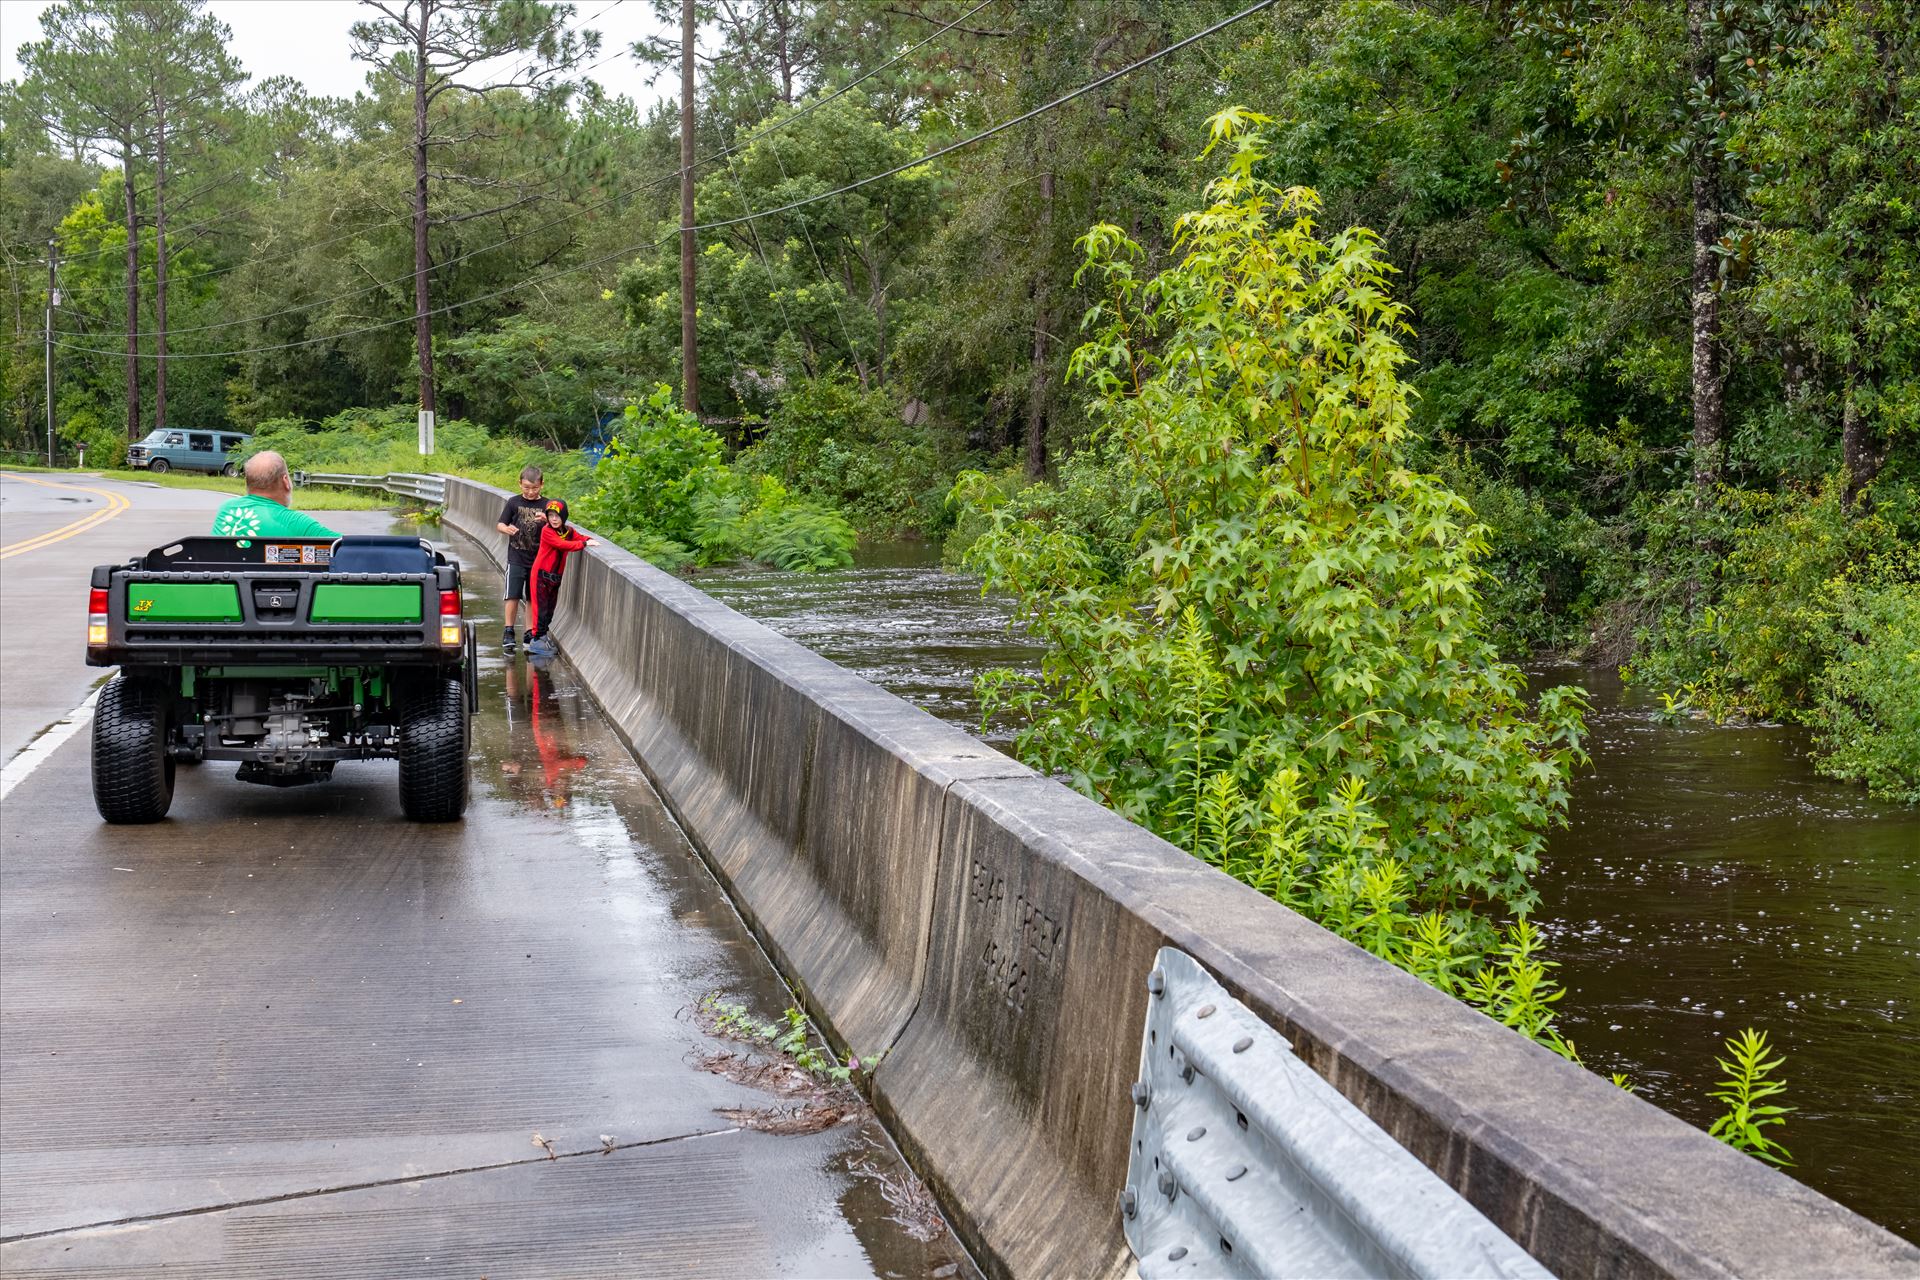 bear creek out of bank 4 August 02, 2018.jpg August 02, 2018 heavy rains flooded many parts of Bay County, Florida. This photo is in the Bear Creek area. by Terry Kelly Photography